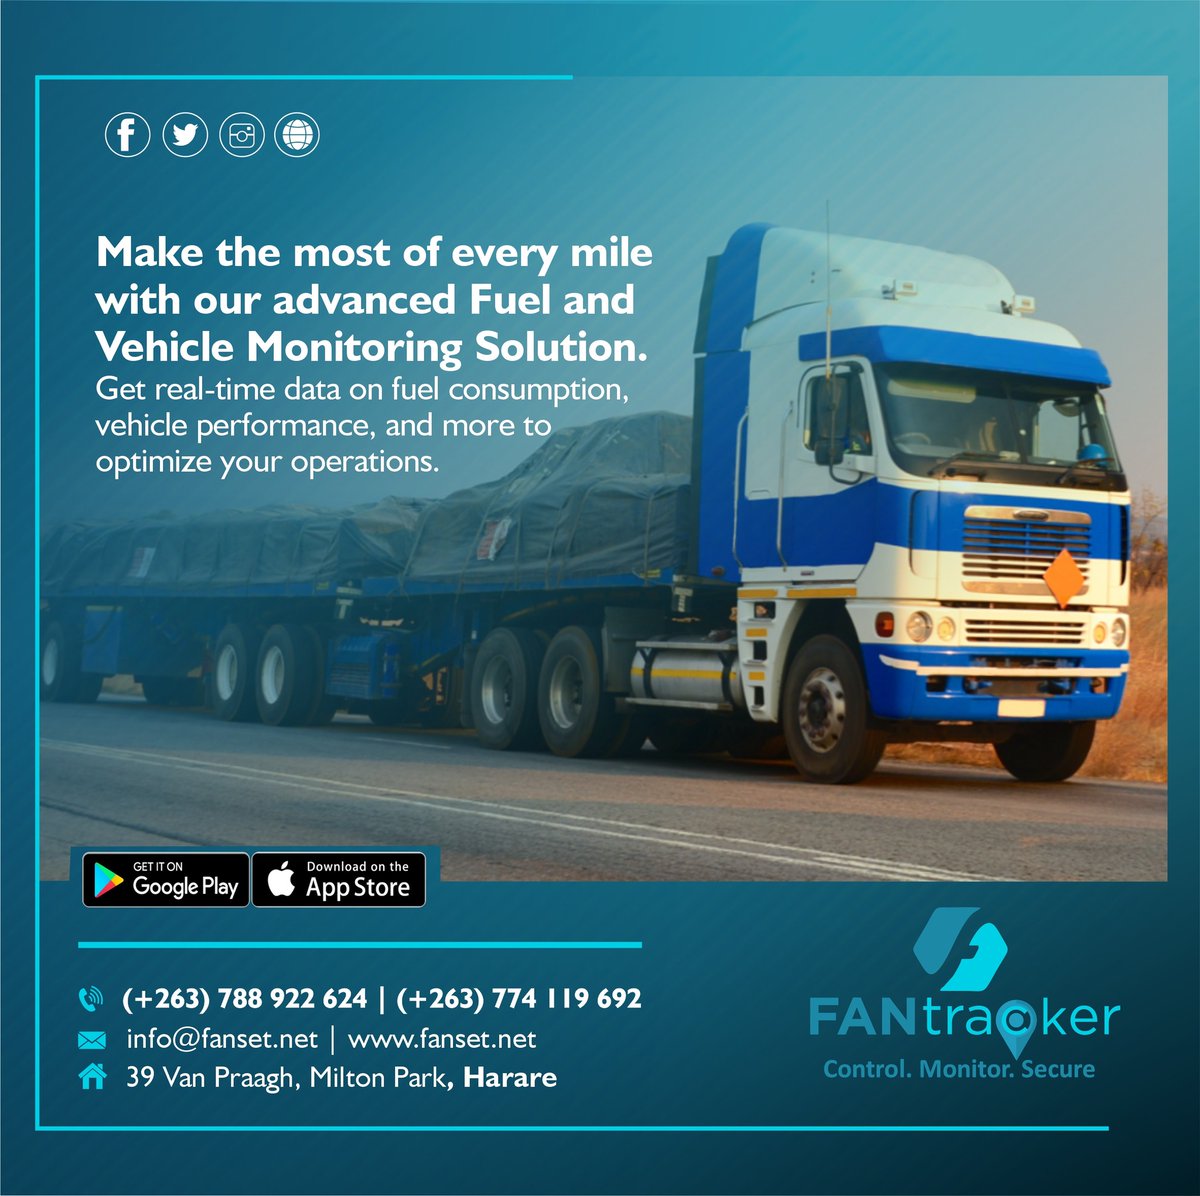 Protect your valuable fuel resources with our Advanced Fuel Monitoring Solution. FANtracker monitors fuel levels and detects any suspicious activity, providing you with immediate alerts to prevent losses and unauthorized fuel usage.
Contact: 263778179409/ 0774119692

#FANtracker